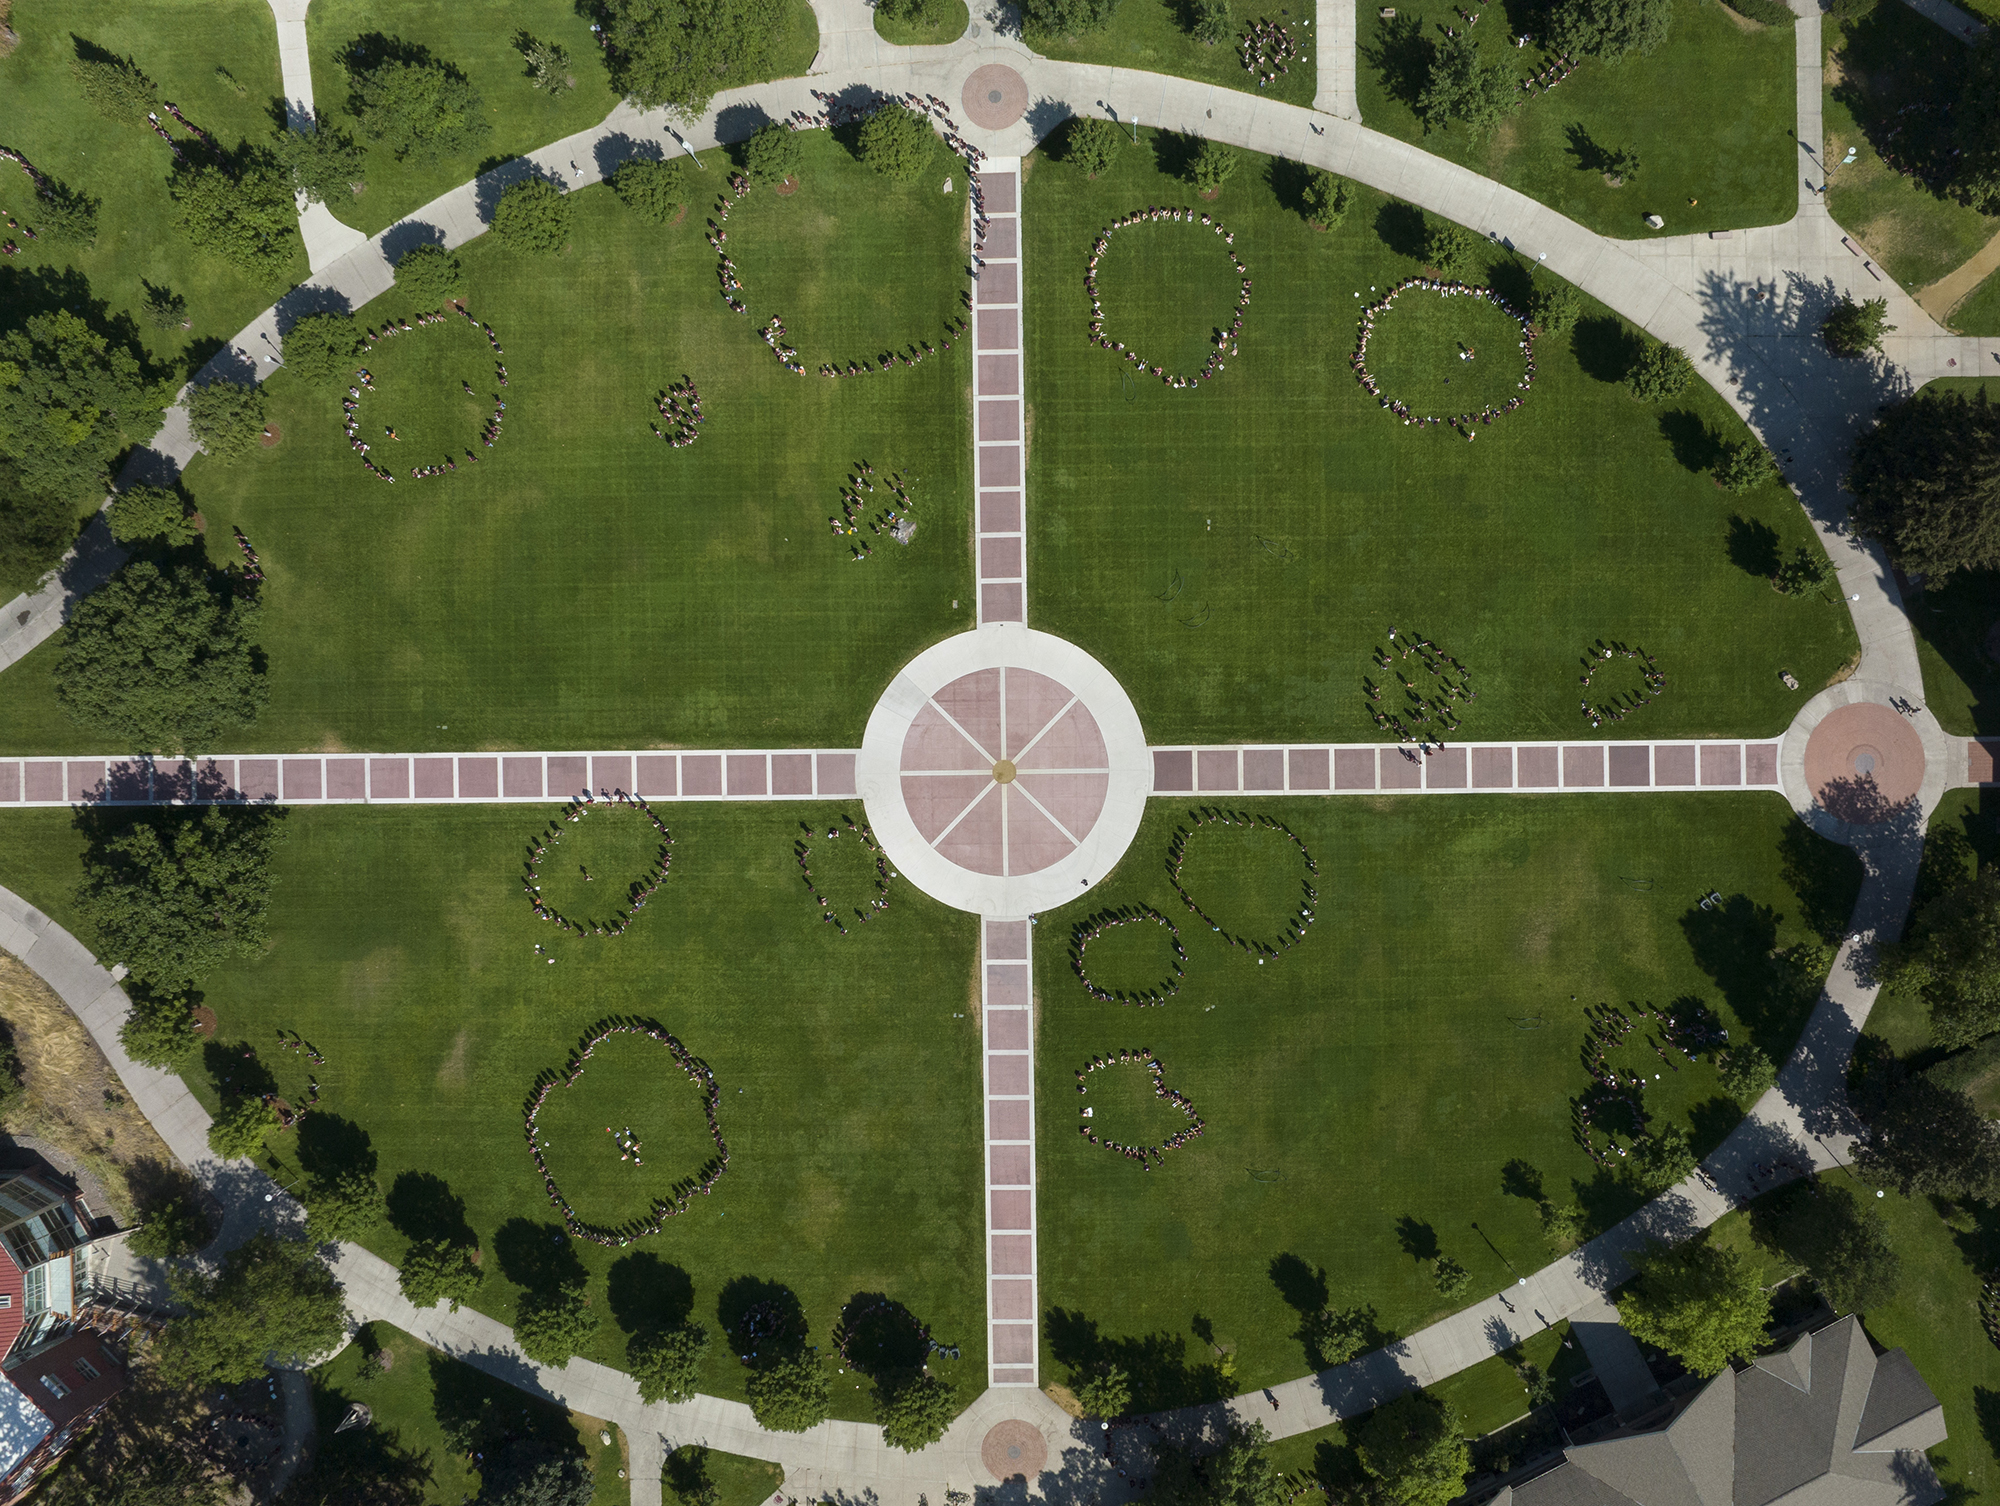 Looking directly down on the Oval at UM from a drone